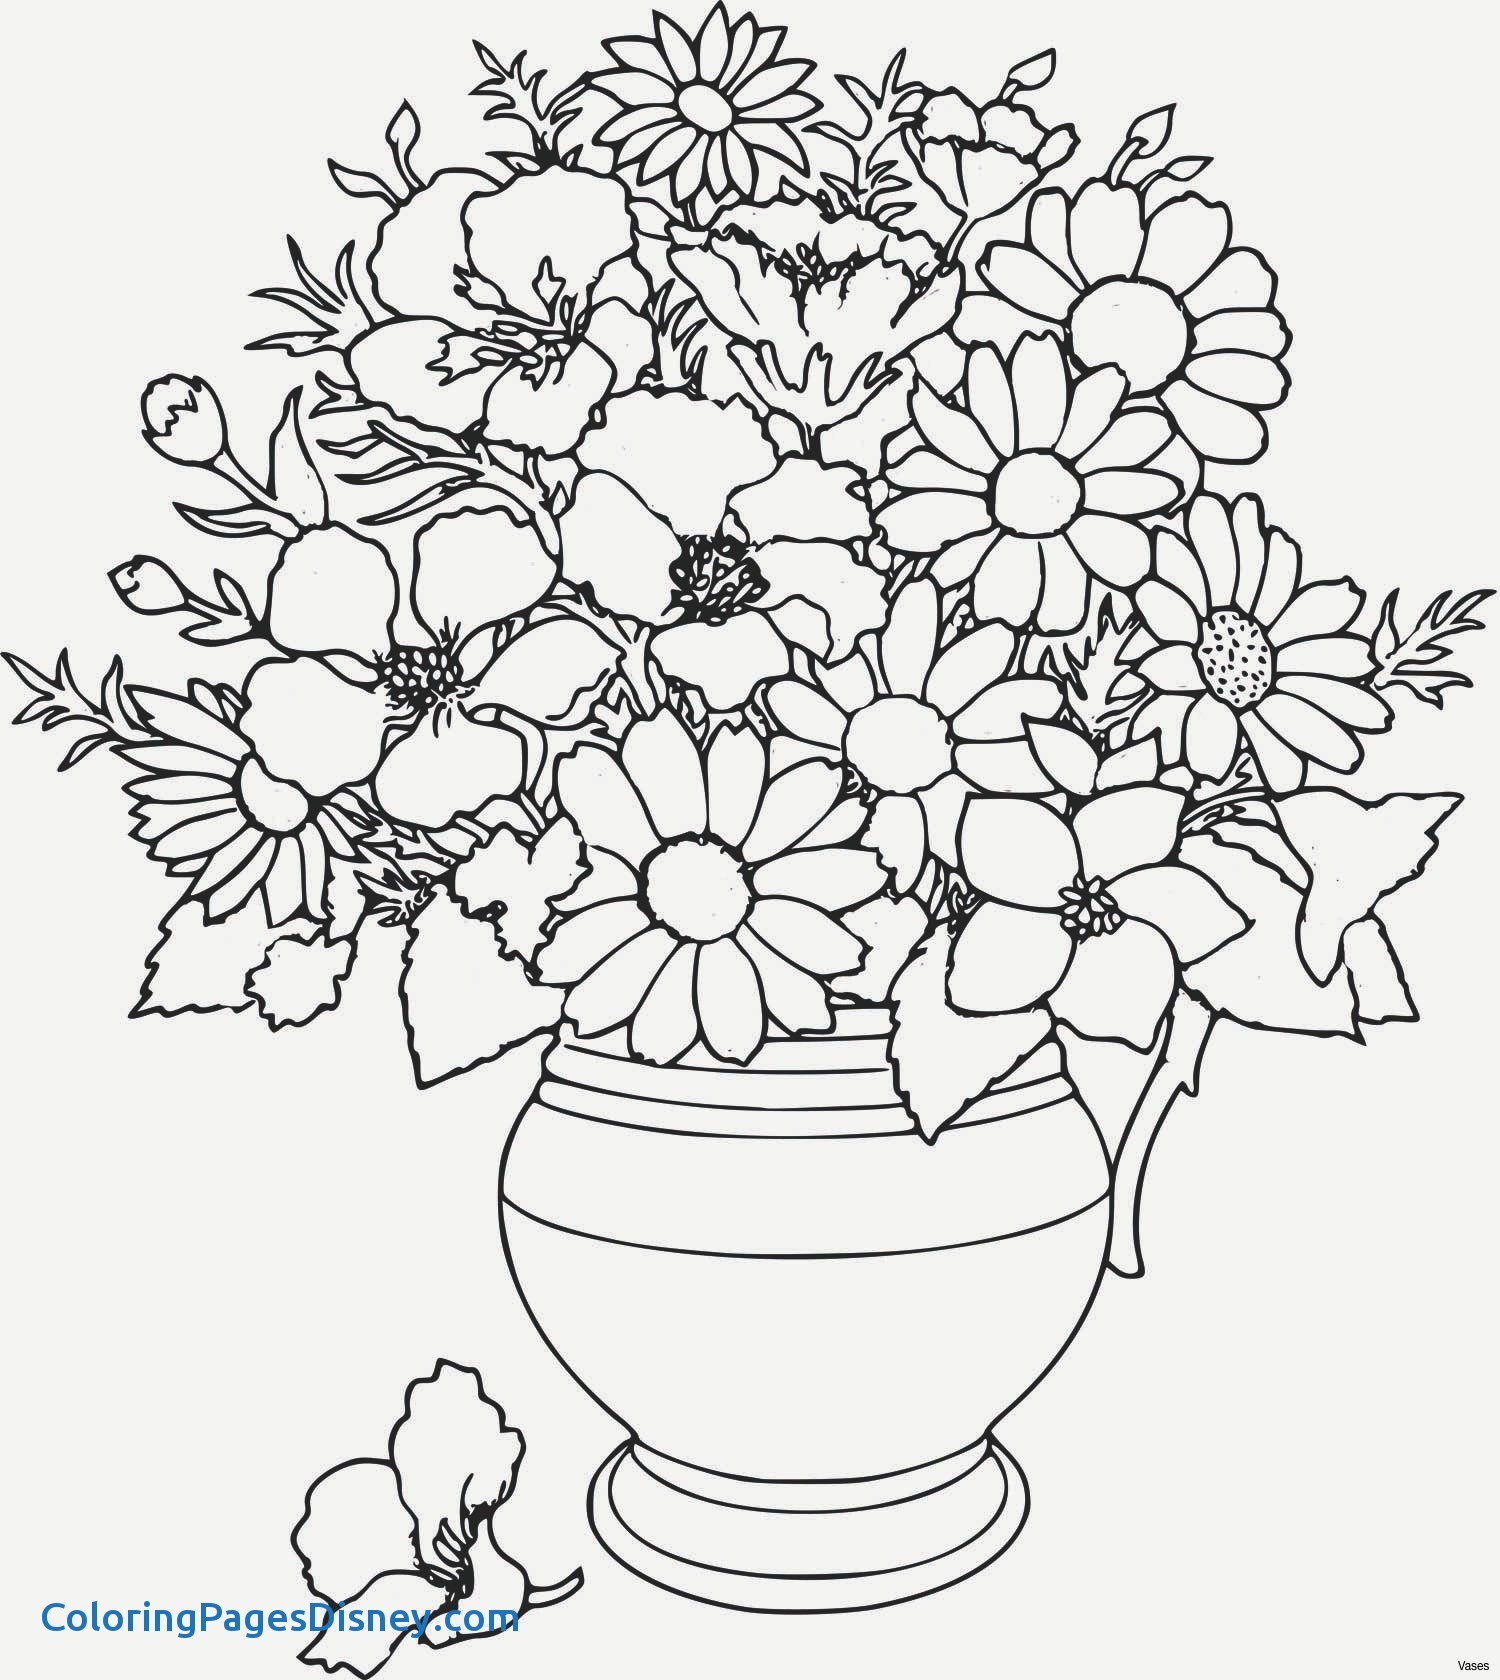 Flower Vase Coloring Pages at GetColorings.com | Free printable